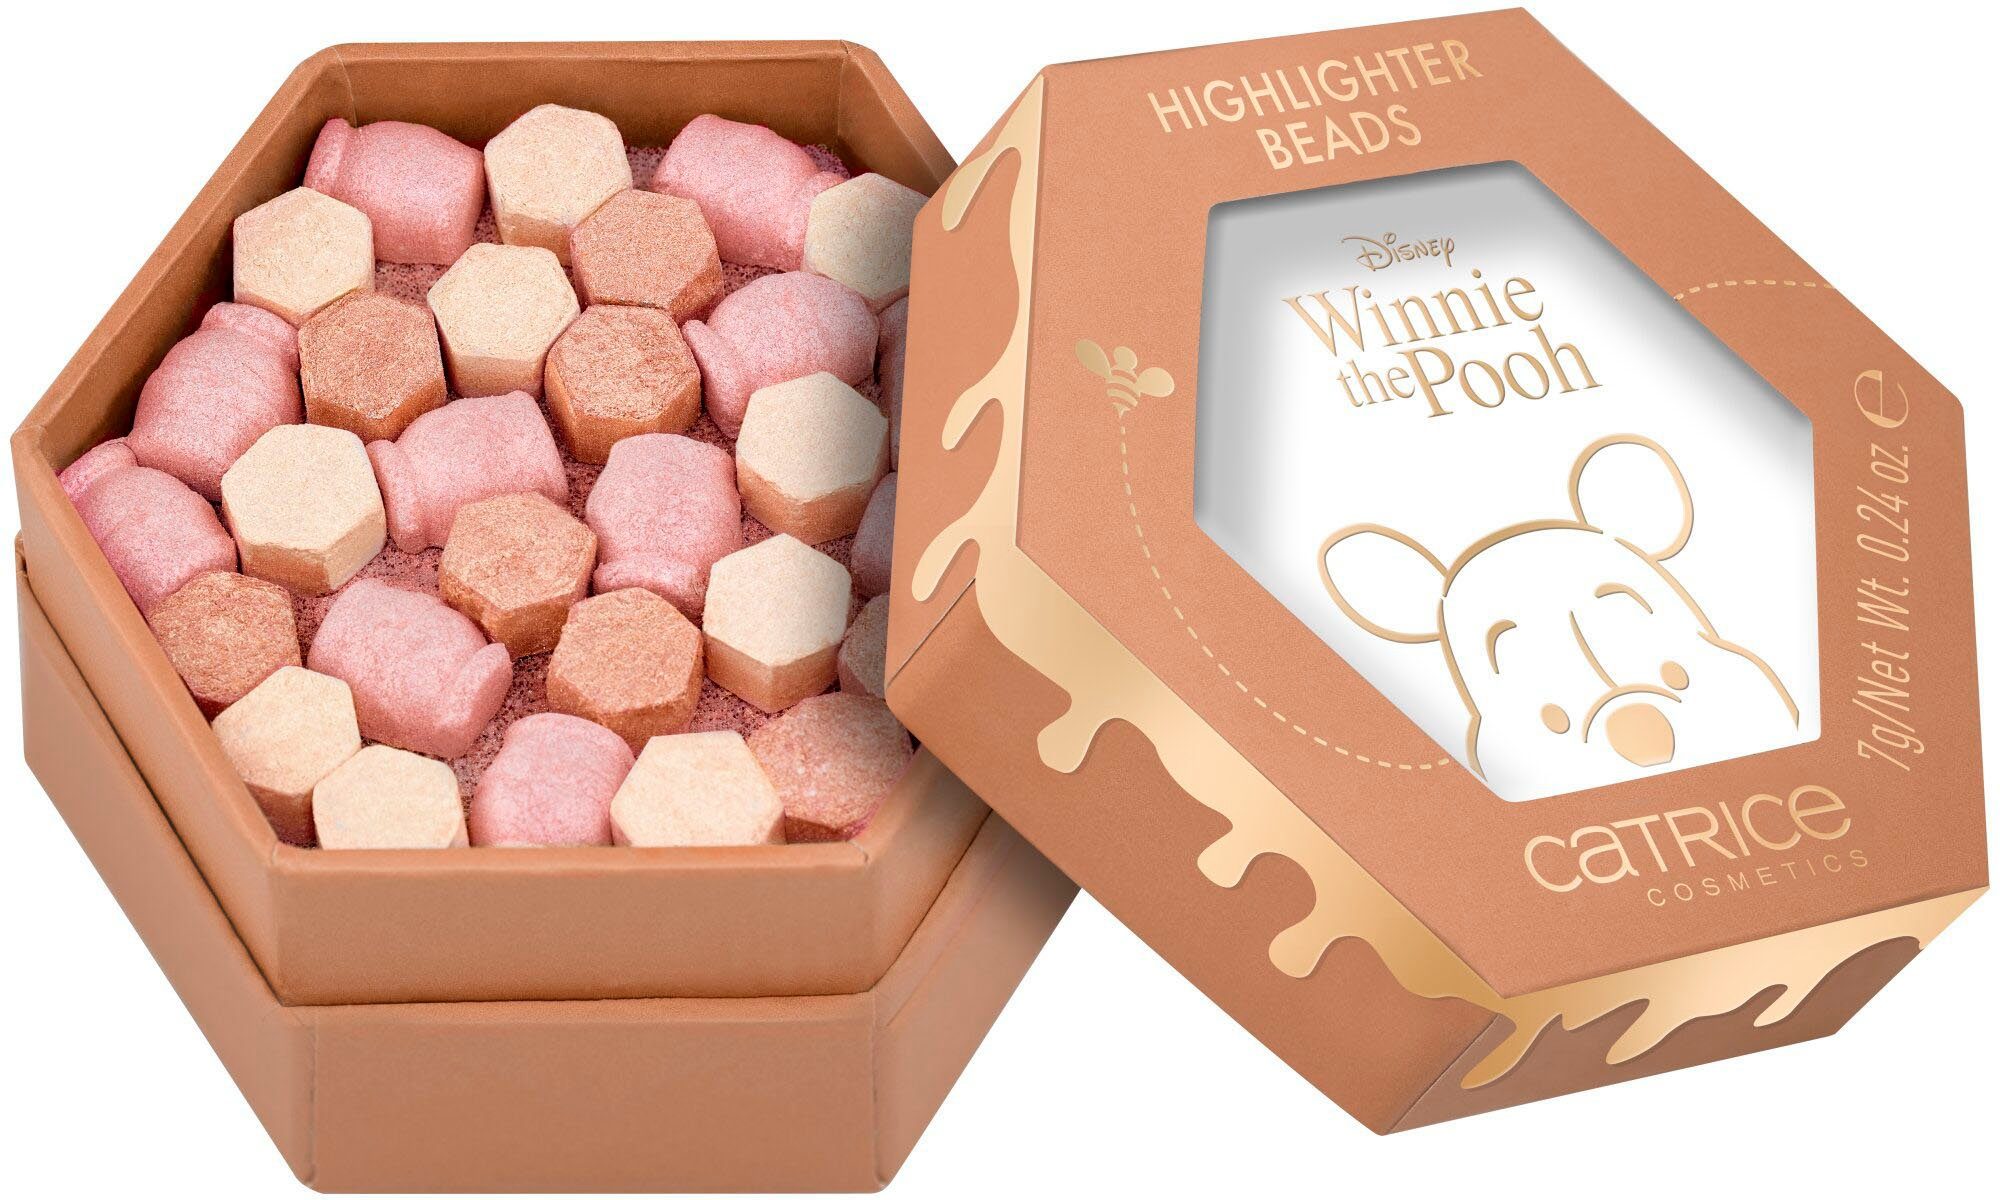 Catrice Highlighter Disney Winnie the Pooh Highlighter Beads, | Selbstbräunungs-Mousse